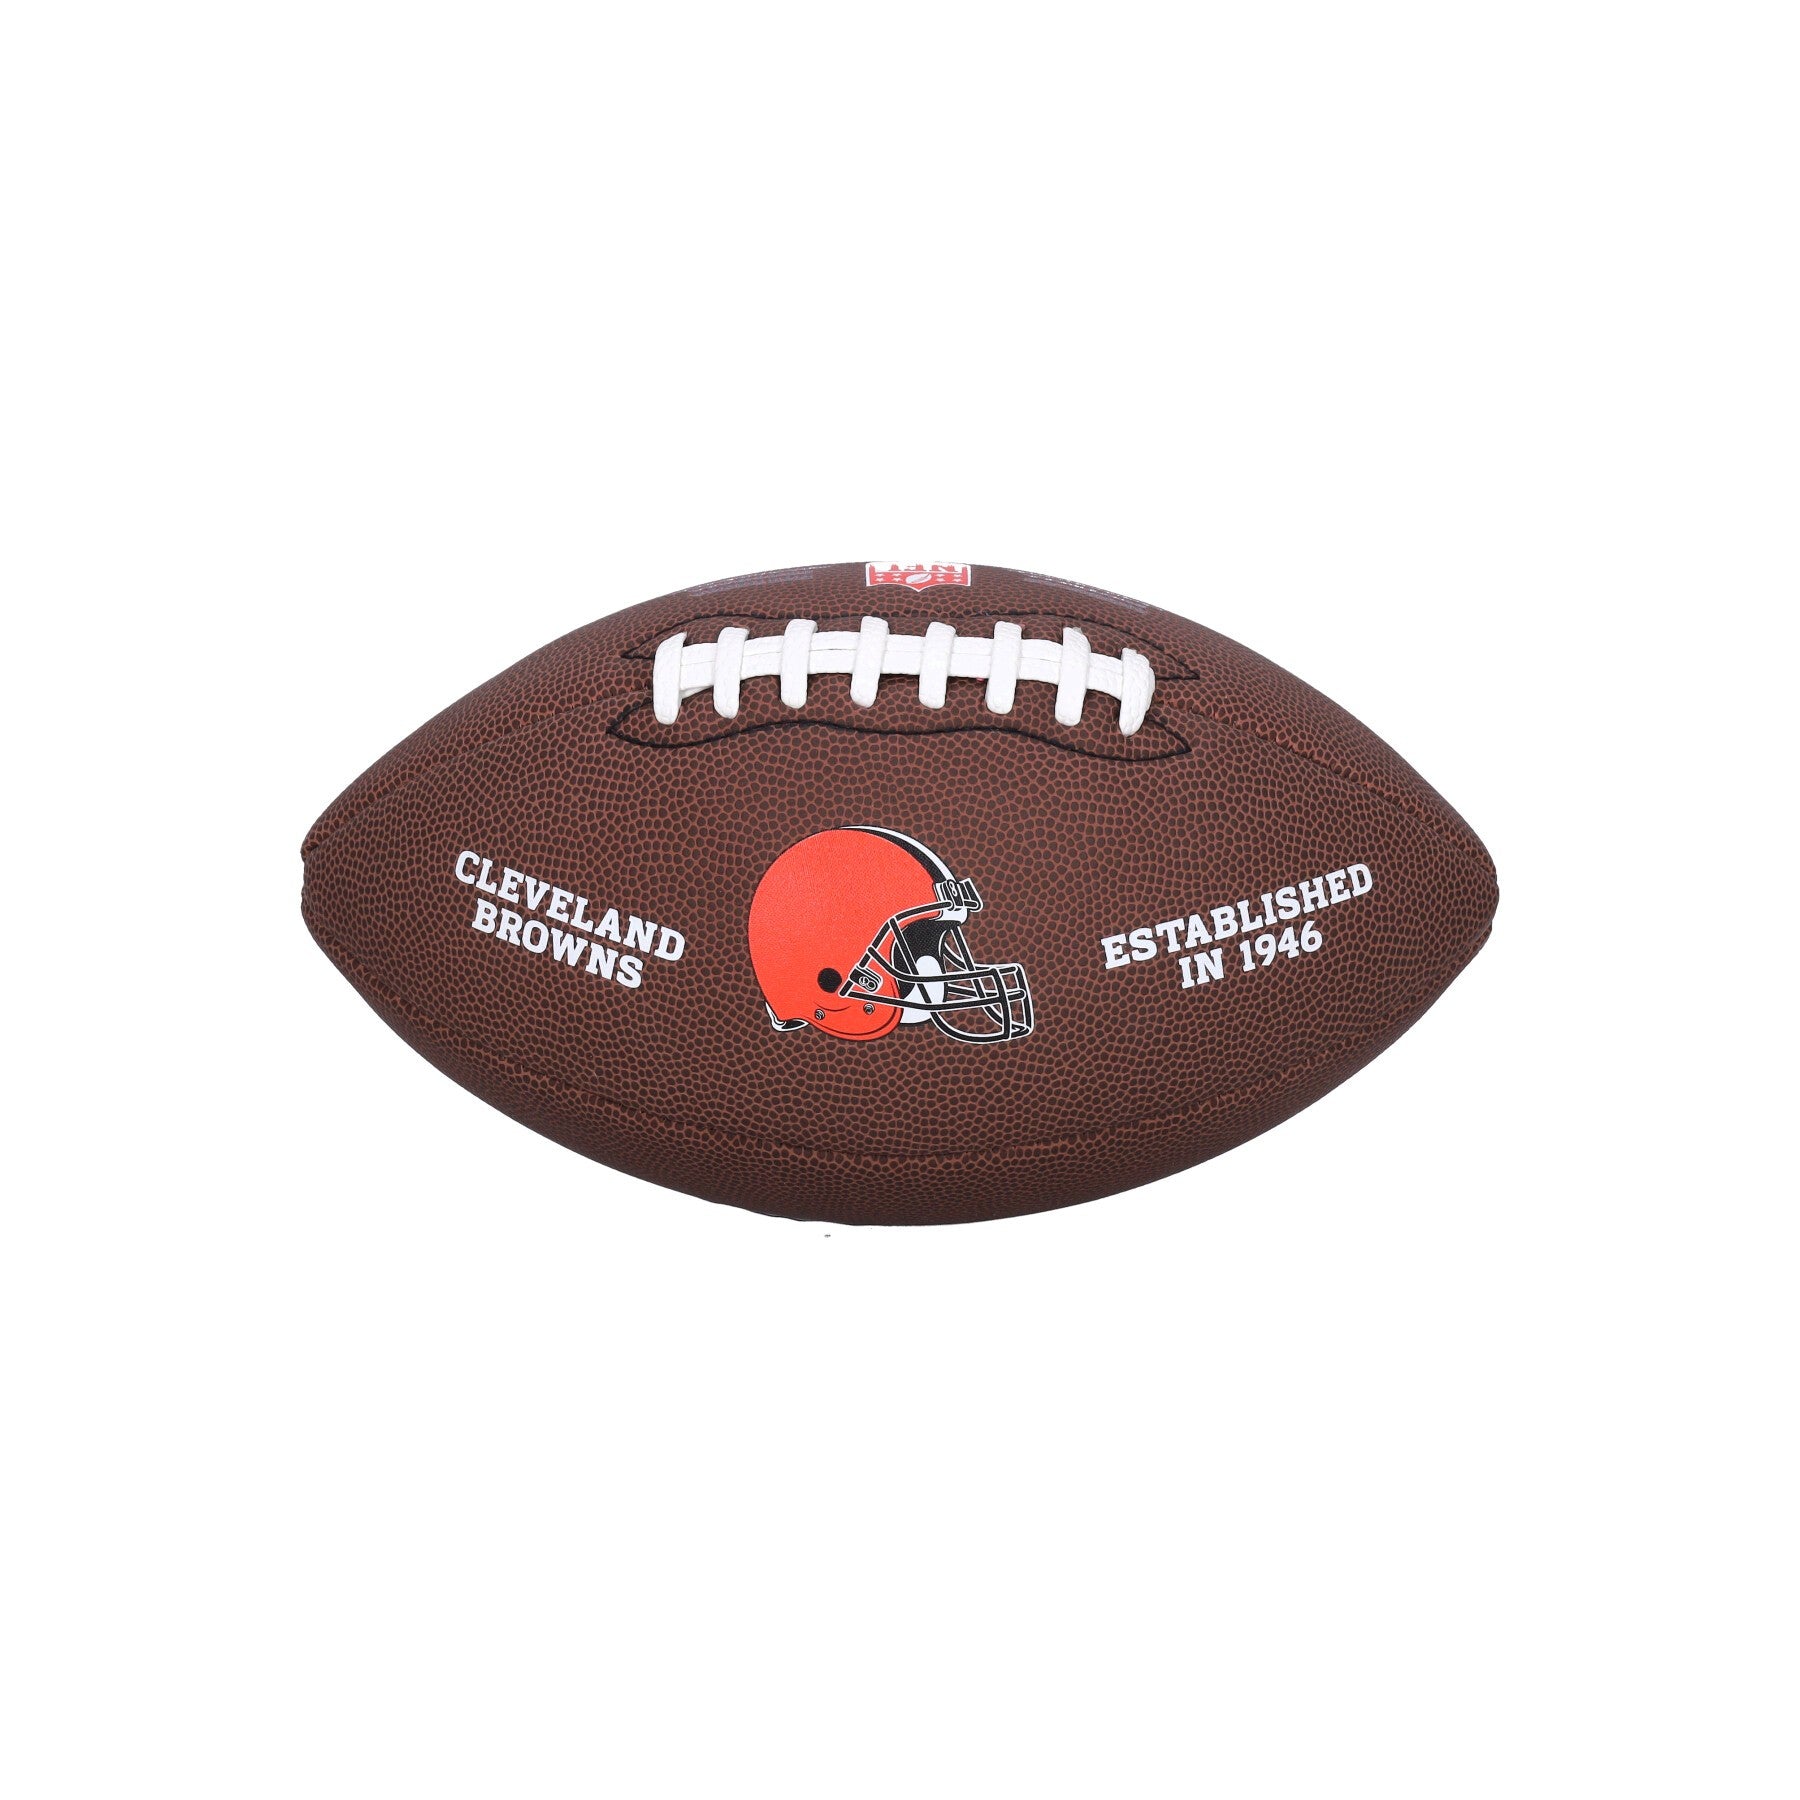 Wilson Team, Pallone Uomo Nfl Licensed Football Clebro, Brown